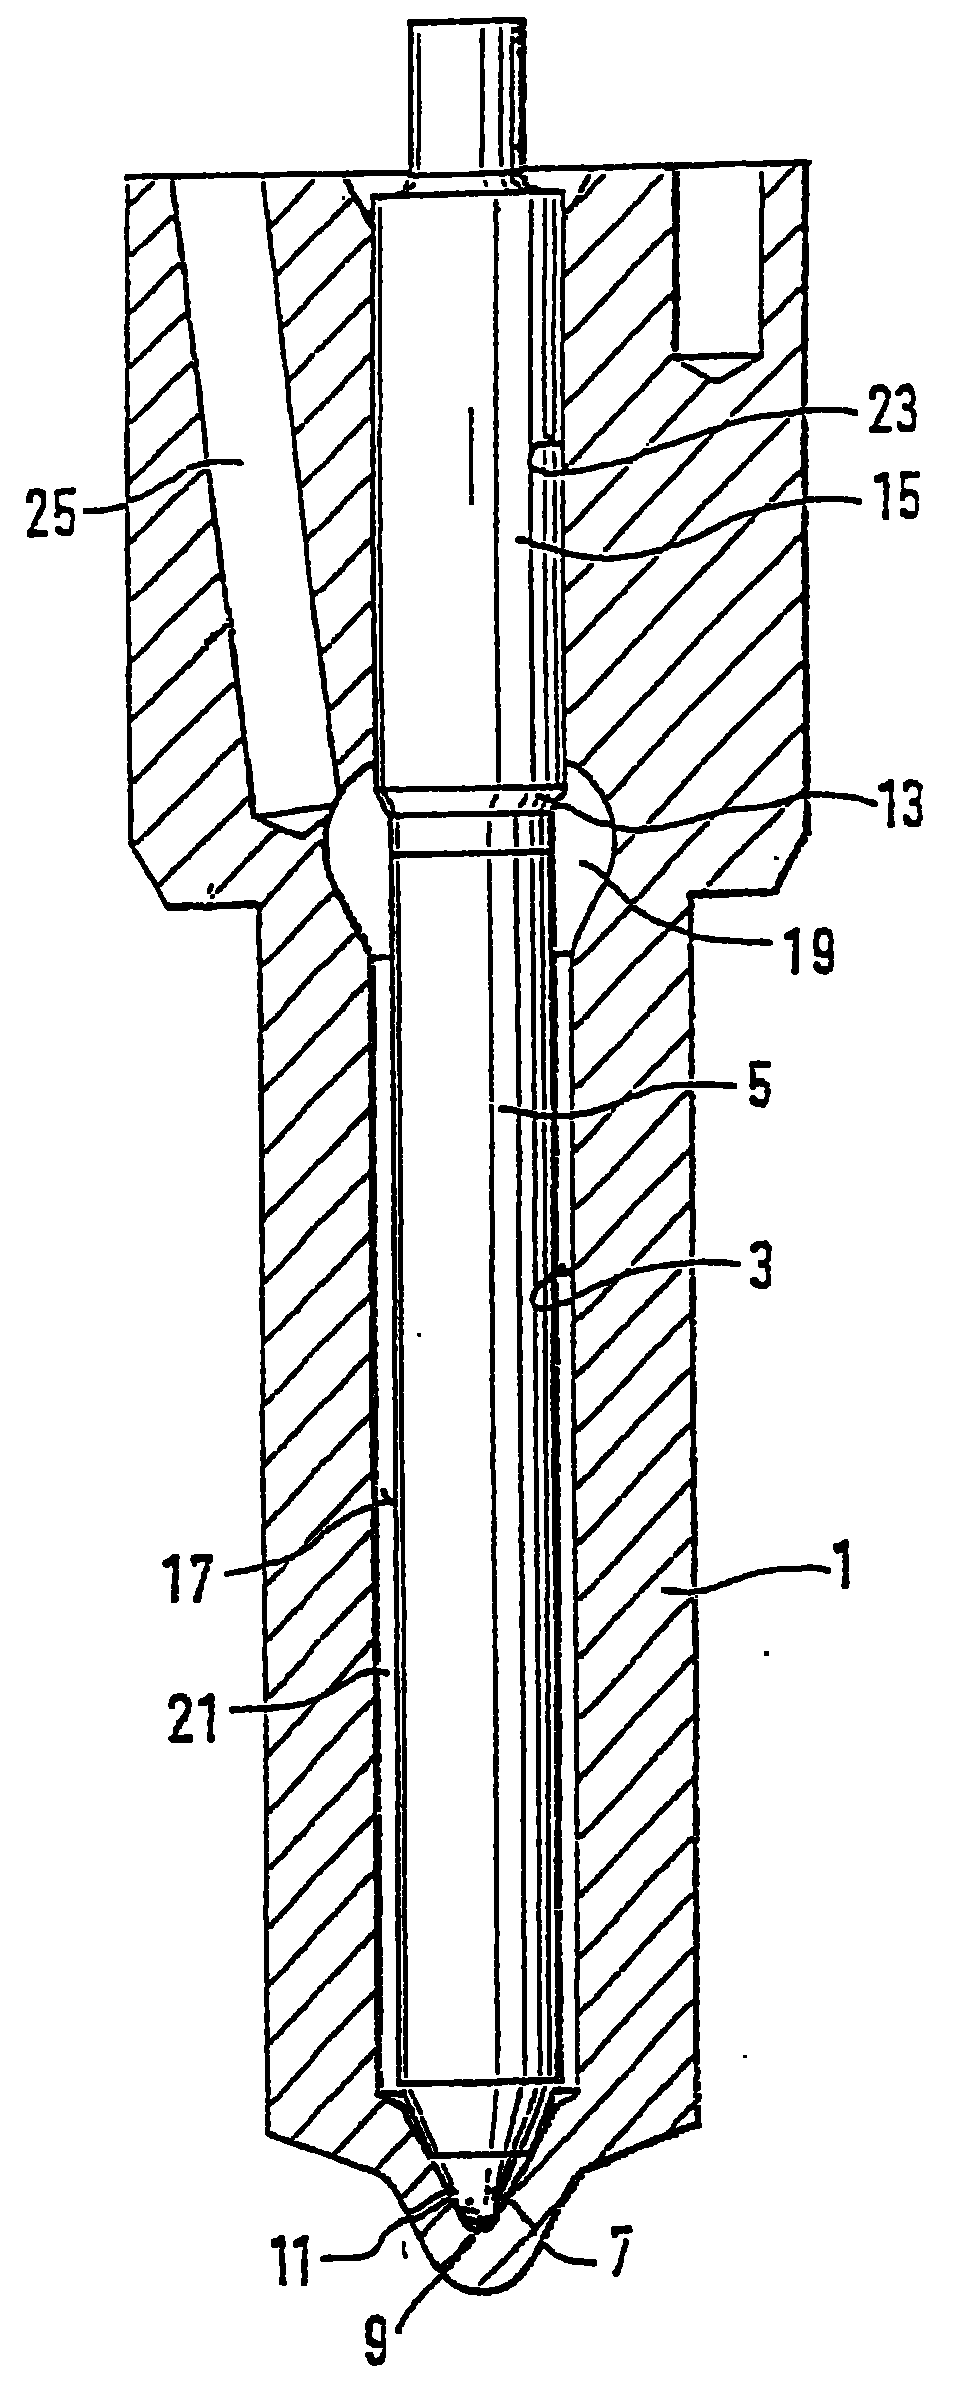 Fuel injection valve for internal combustion engines and a method for hardening said valve